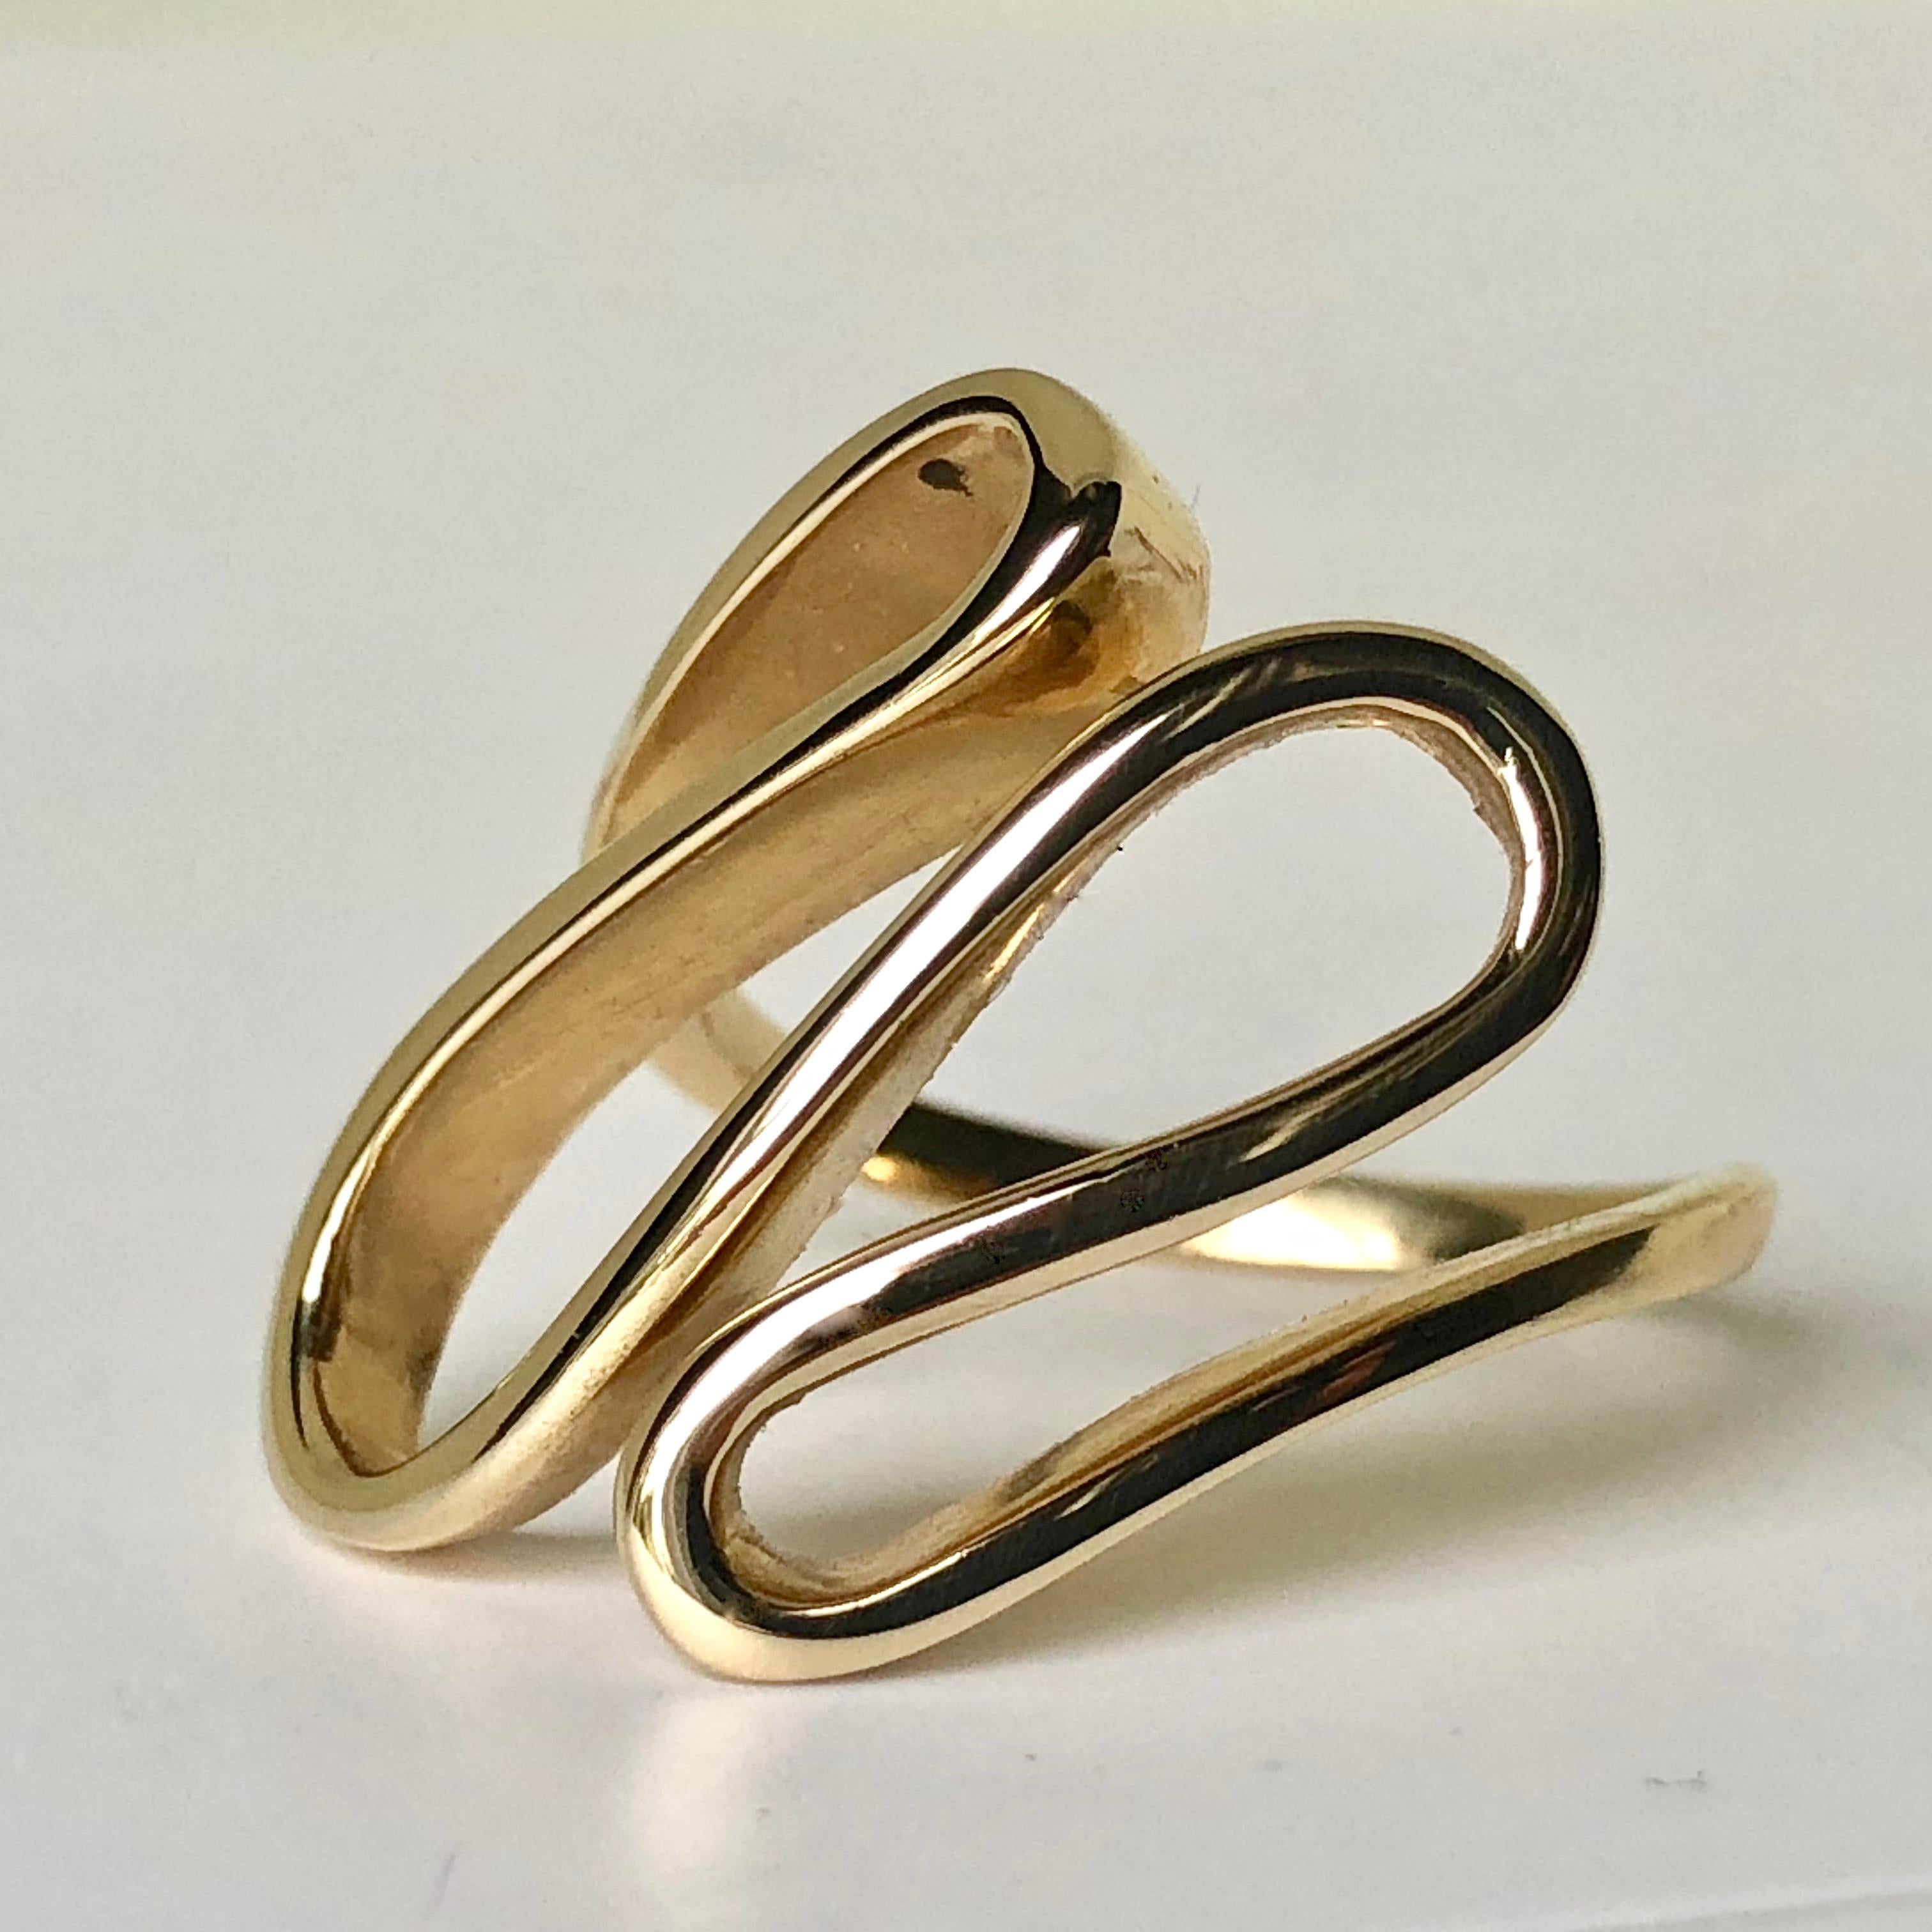 Women's or Men's 18k Yellow Gold Scrolling Stylised Ring Band